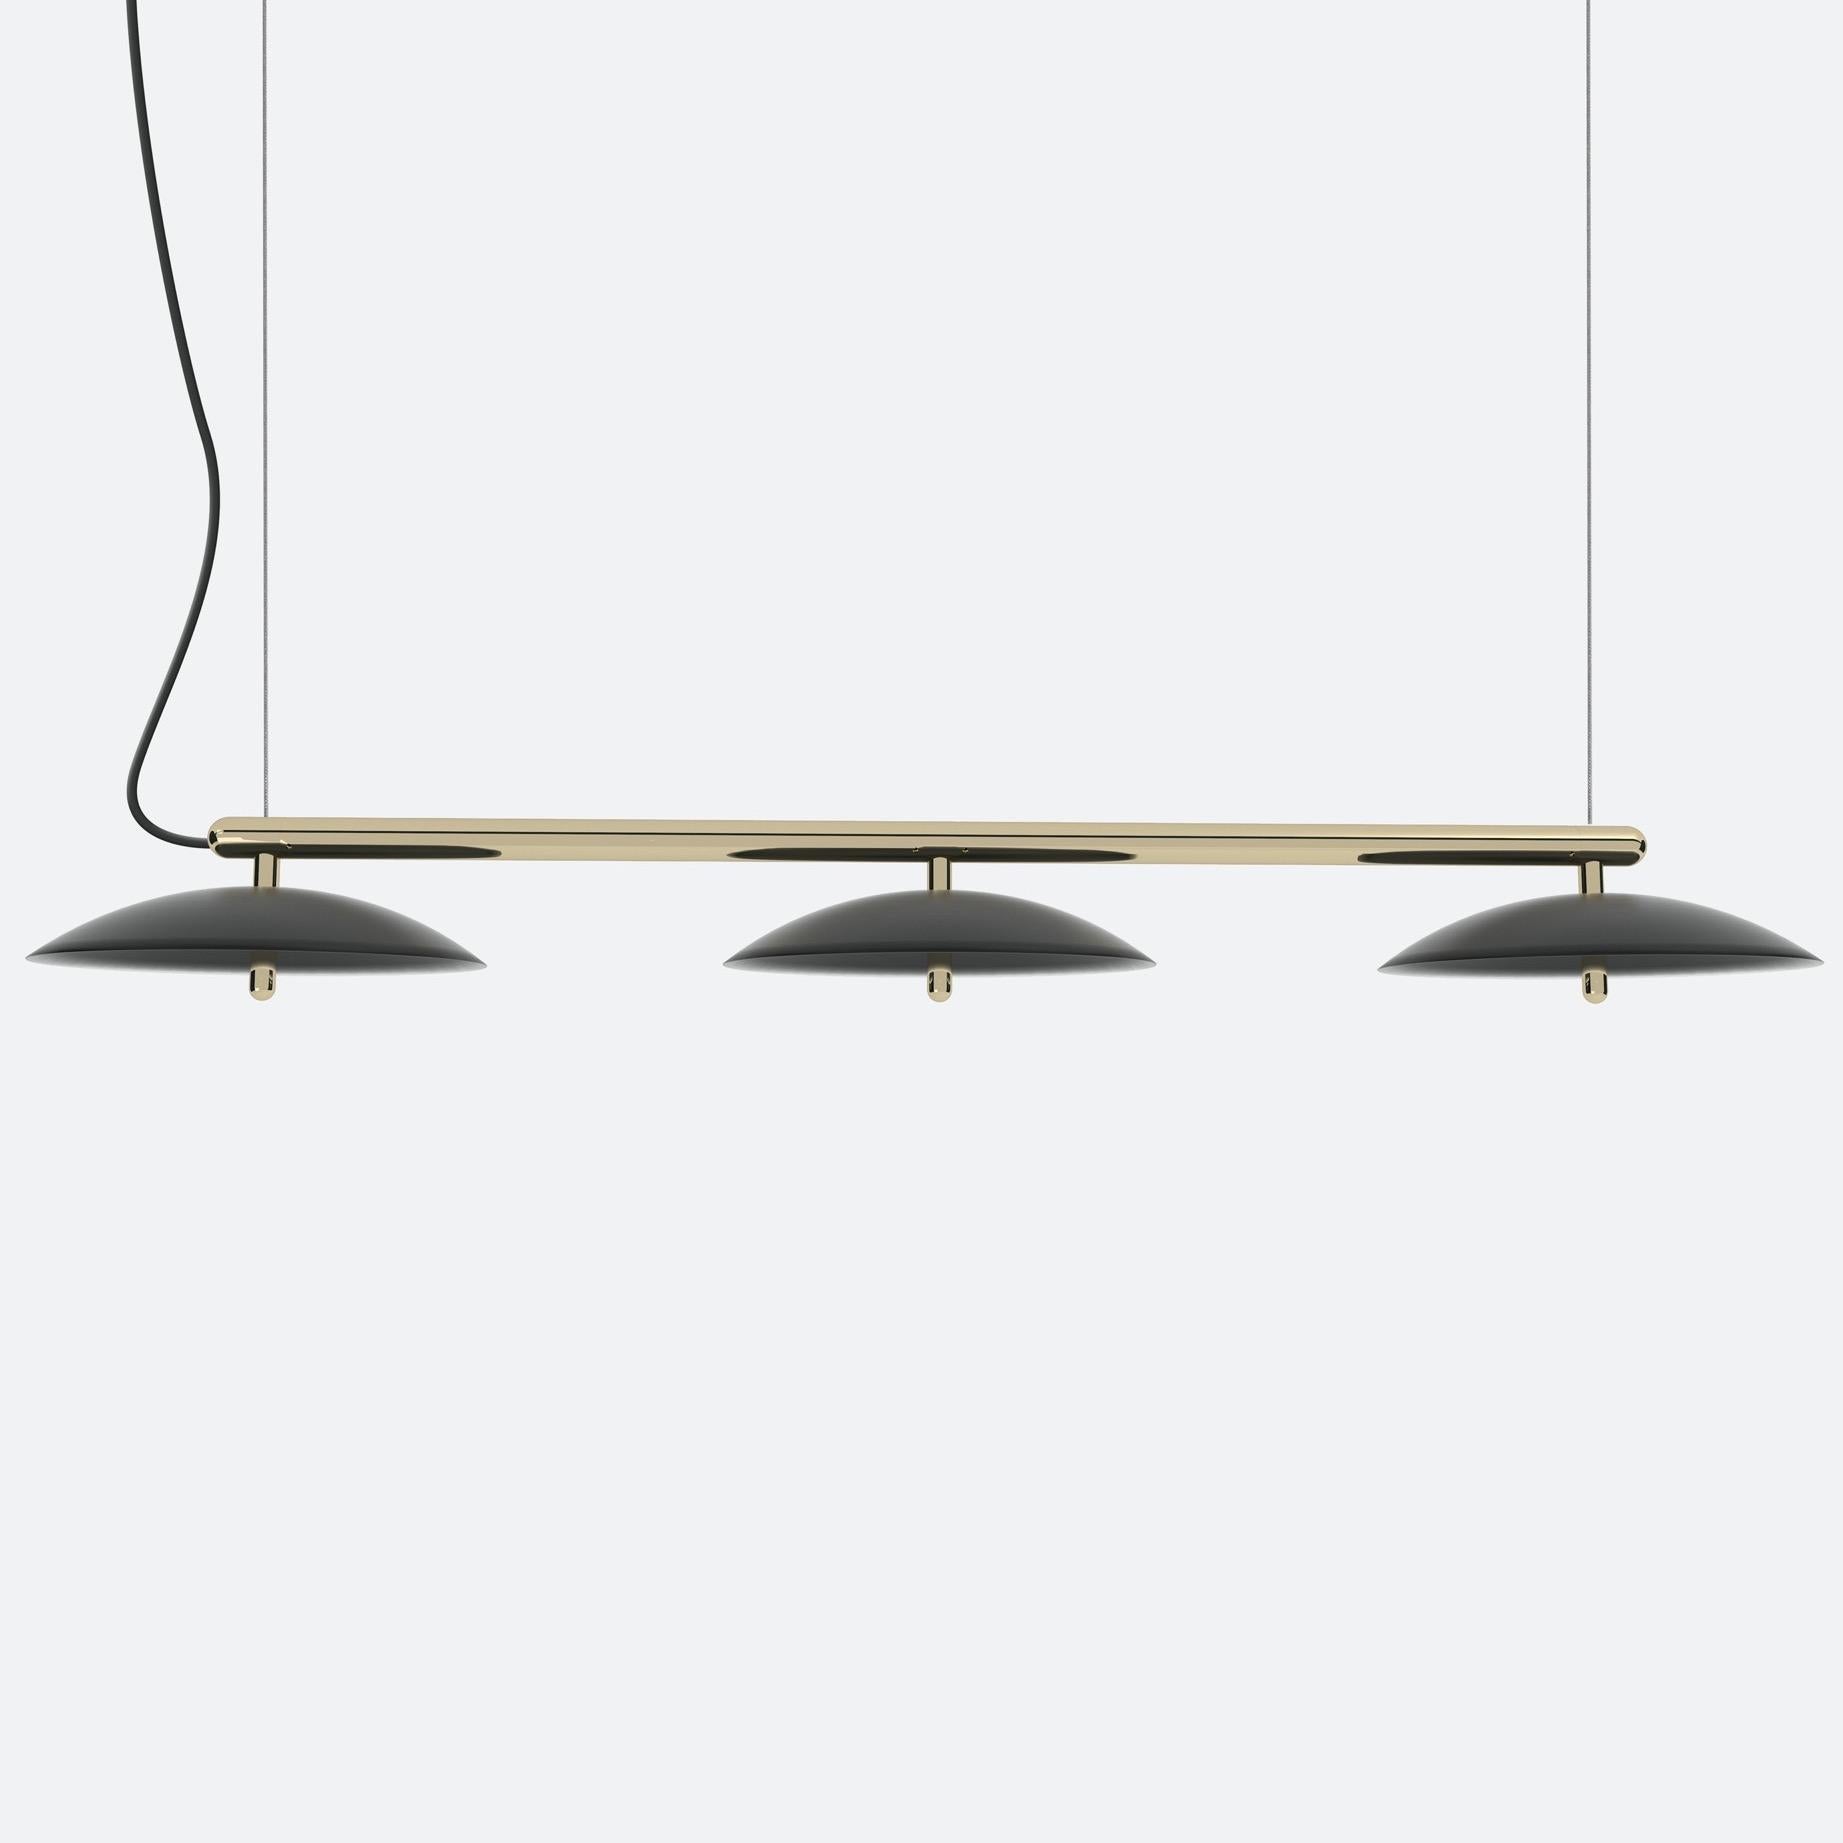 Price is for a Signal linear pendant with black shade and nickel accents. This piece is customizable so we can also make the finishes per order to your spec. 

Lamping: G8 LED Bulbs (included)
Canopy: Black, 5in Diameter, .25in height
6x G8 LED